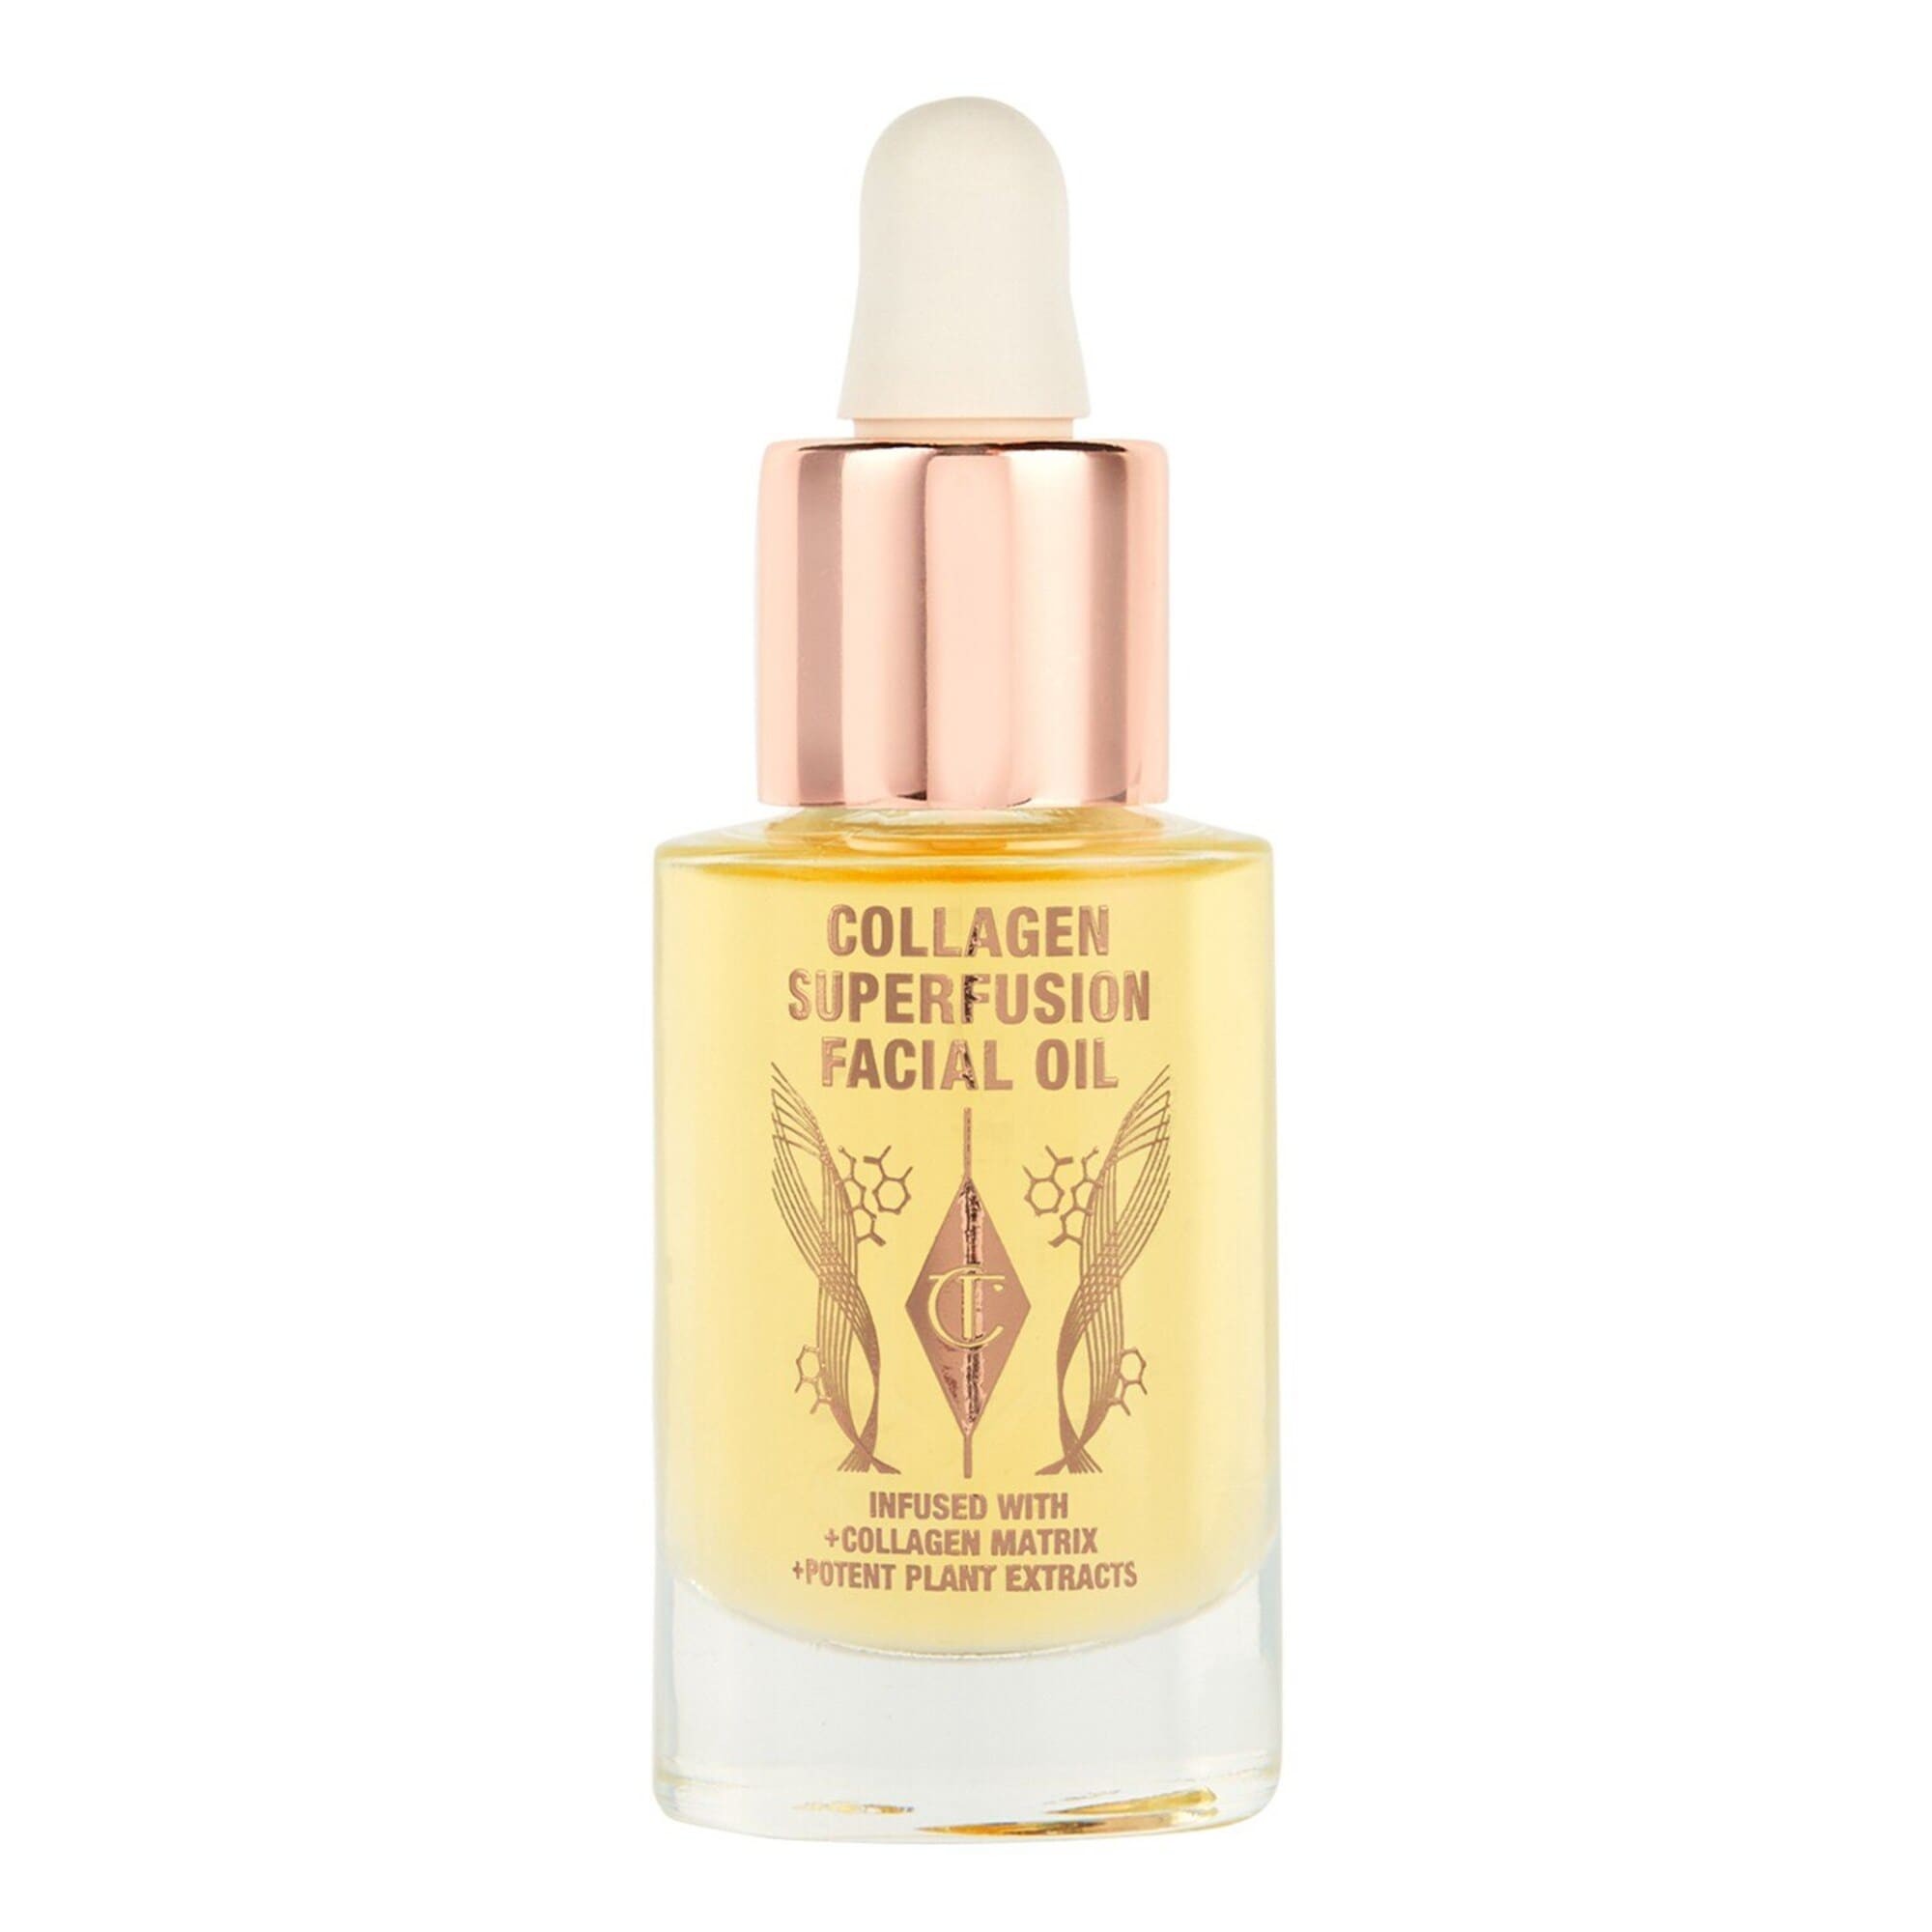 Charlotte Tilbury Collagen Superfusion Facial Oil Travel Size